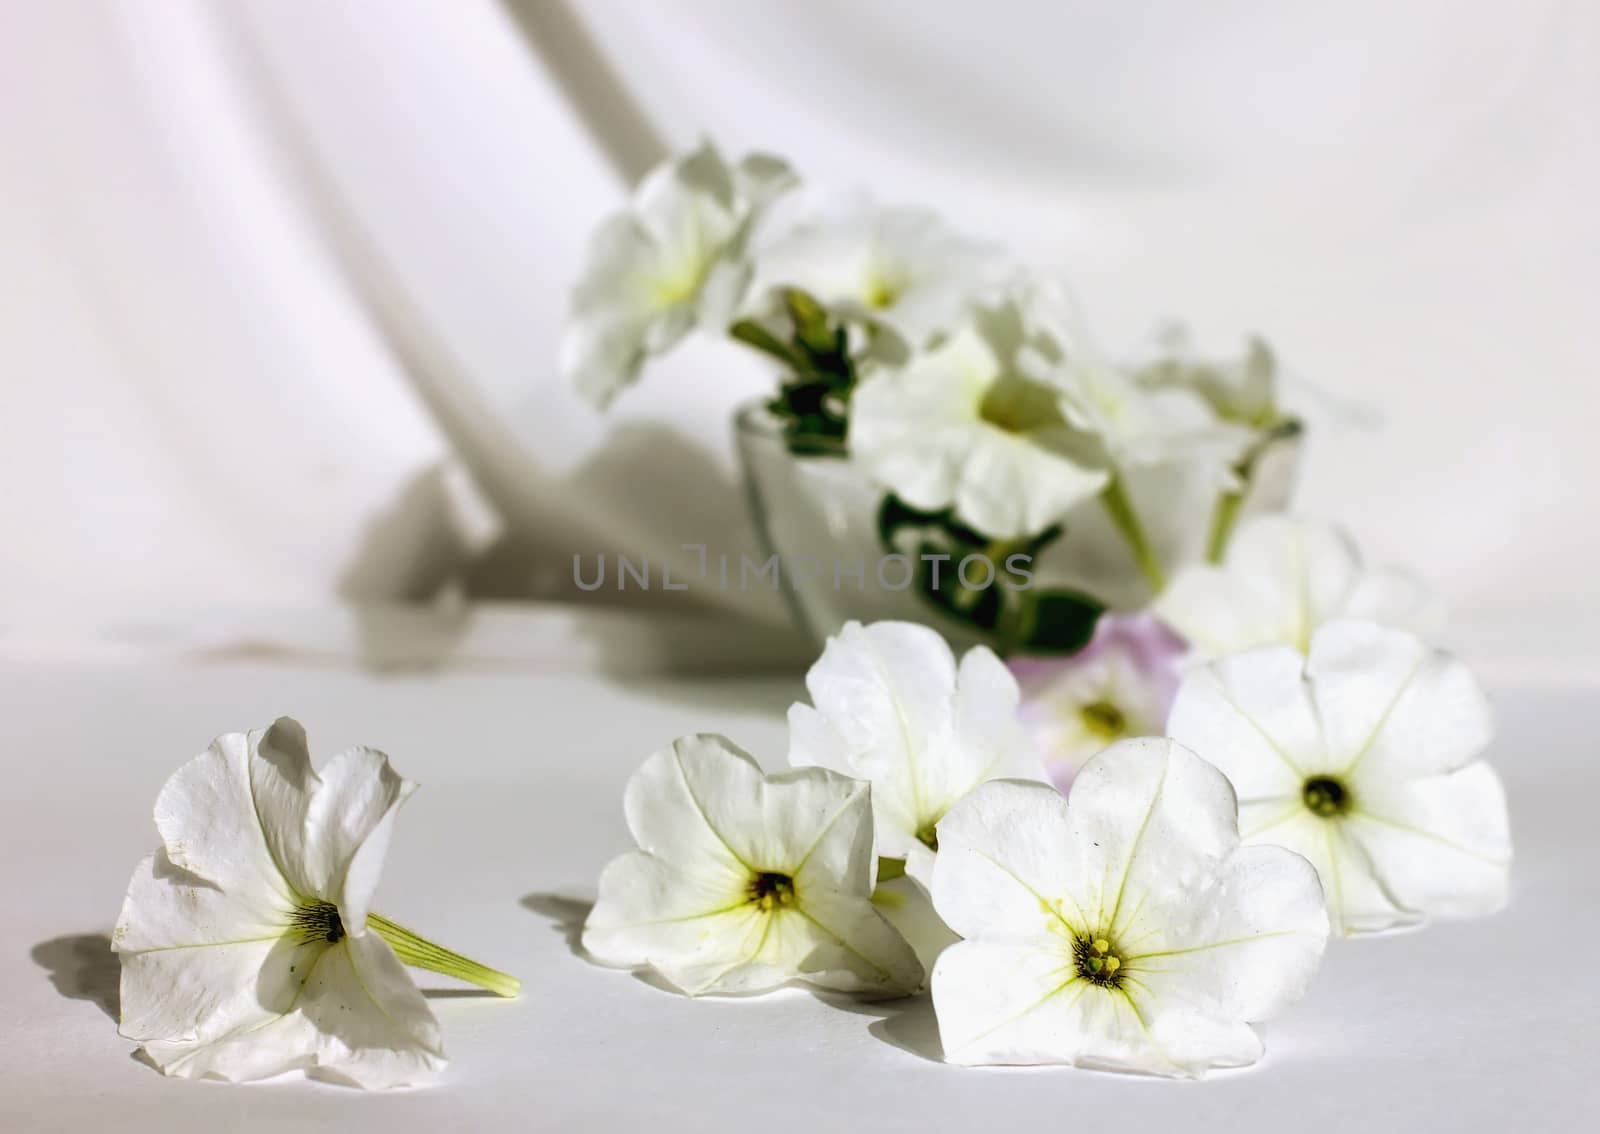 Still life with white petunias on a white fabric flowers in white spread